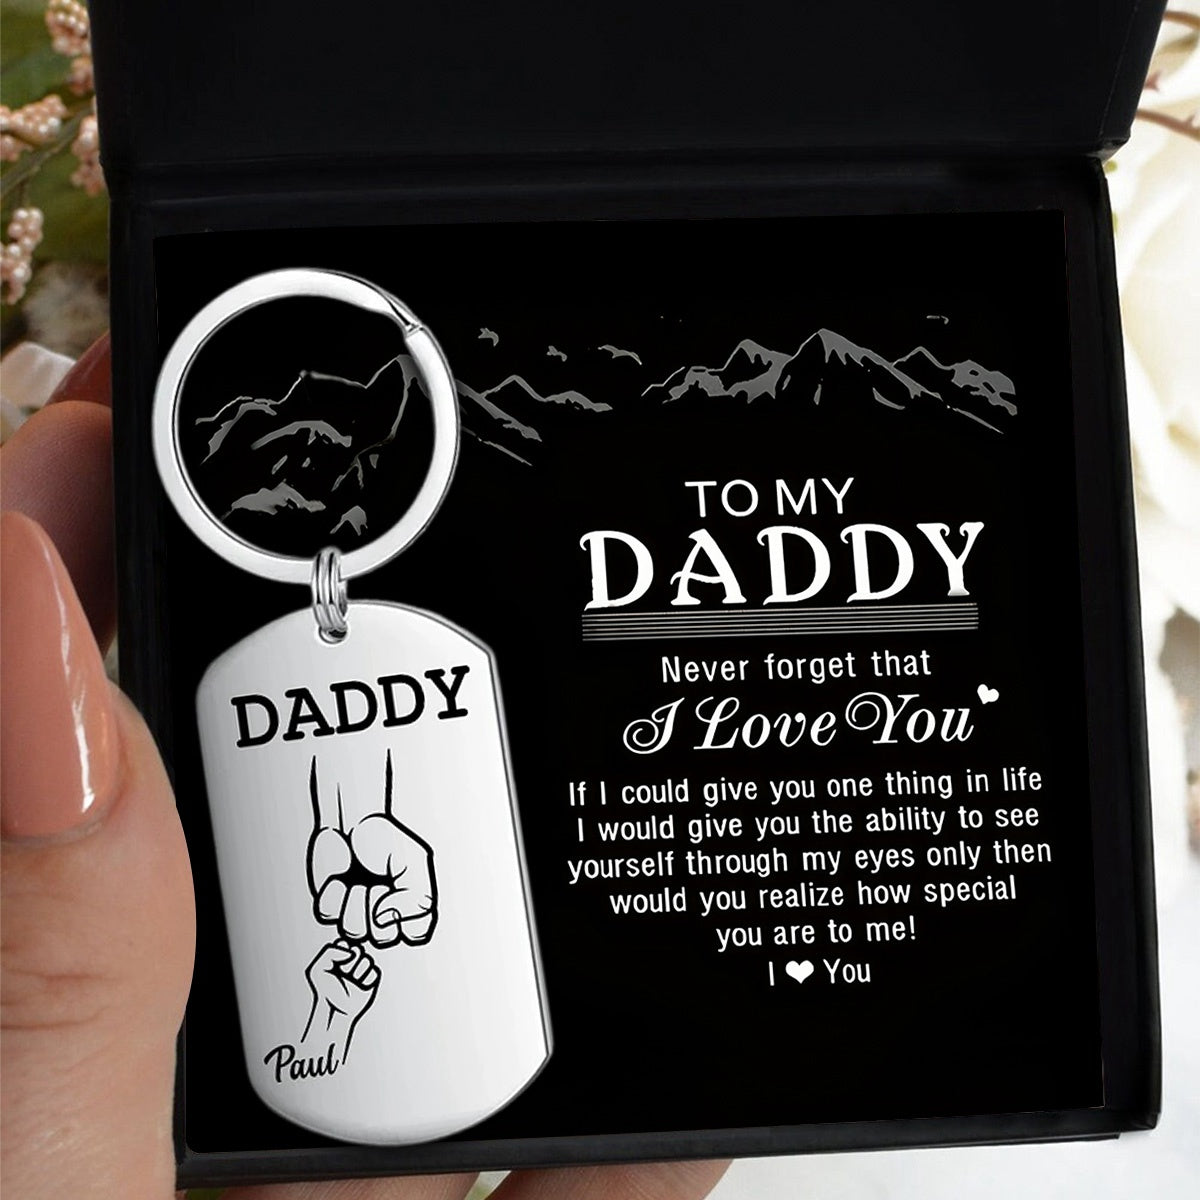 To My Daddy -Personalized Aluminum Keychain Gift for Daddy